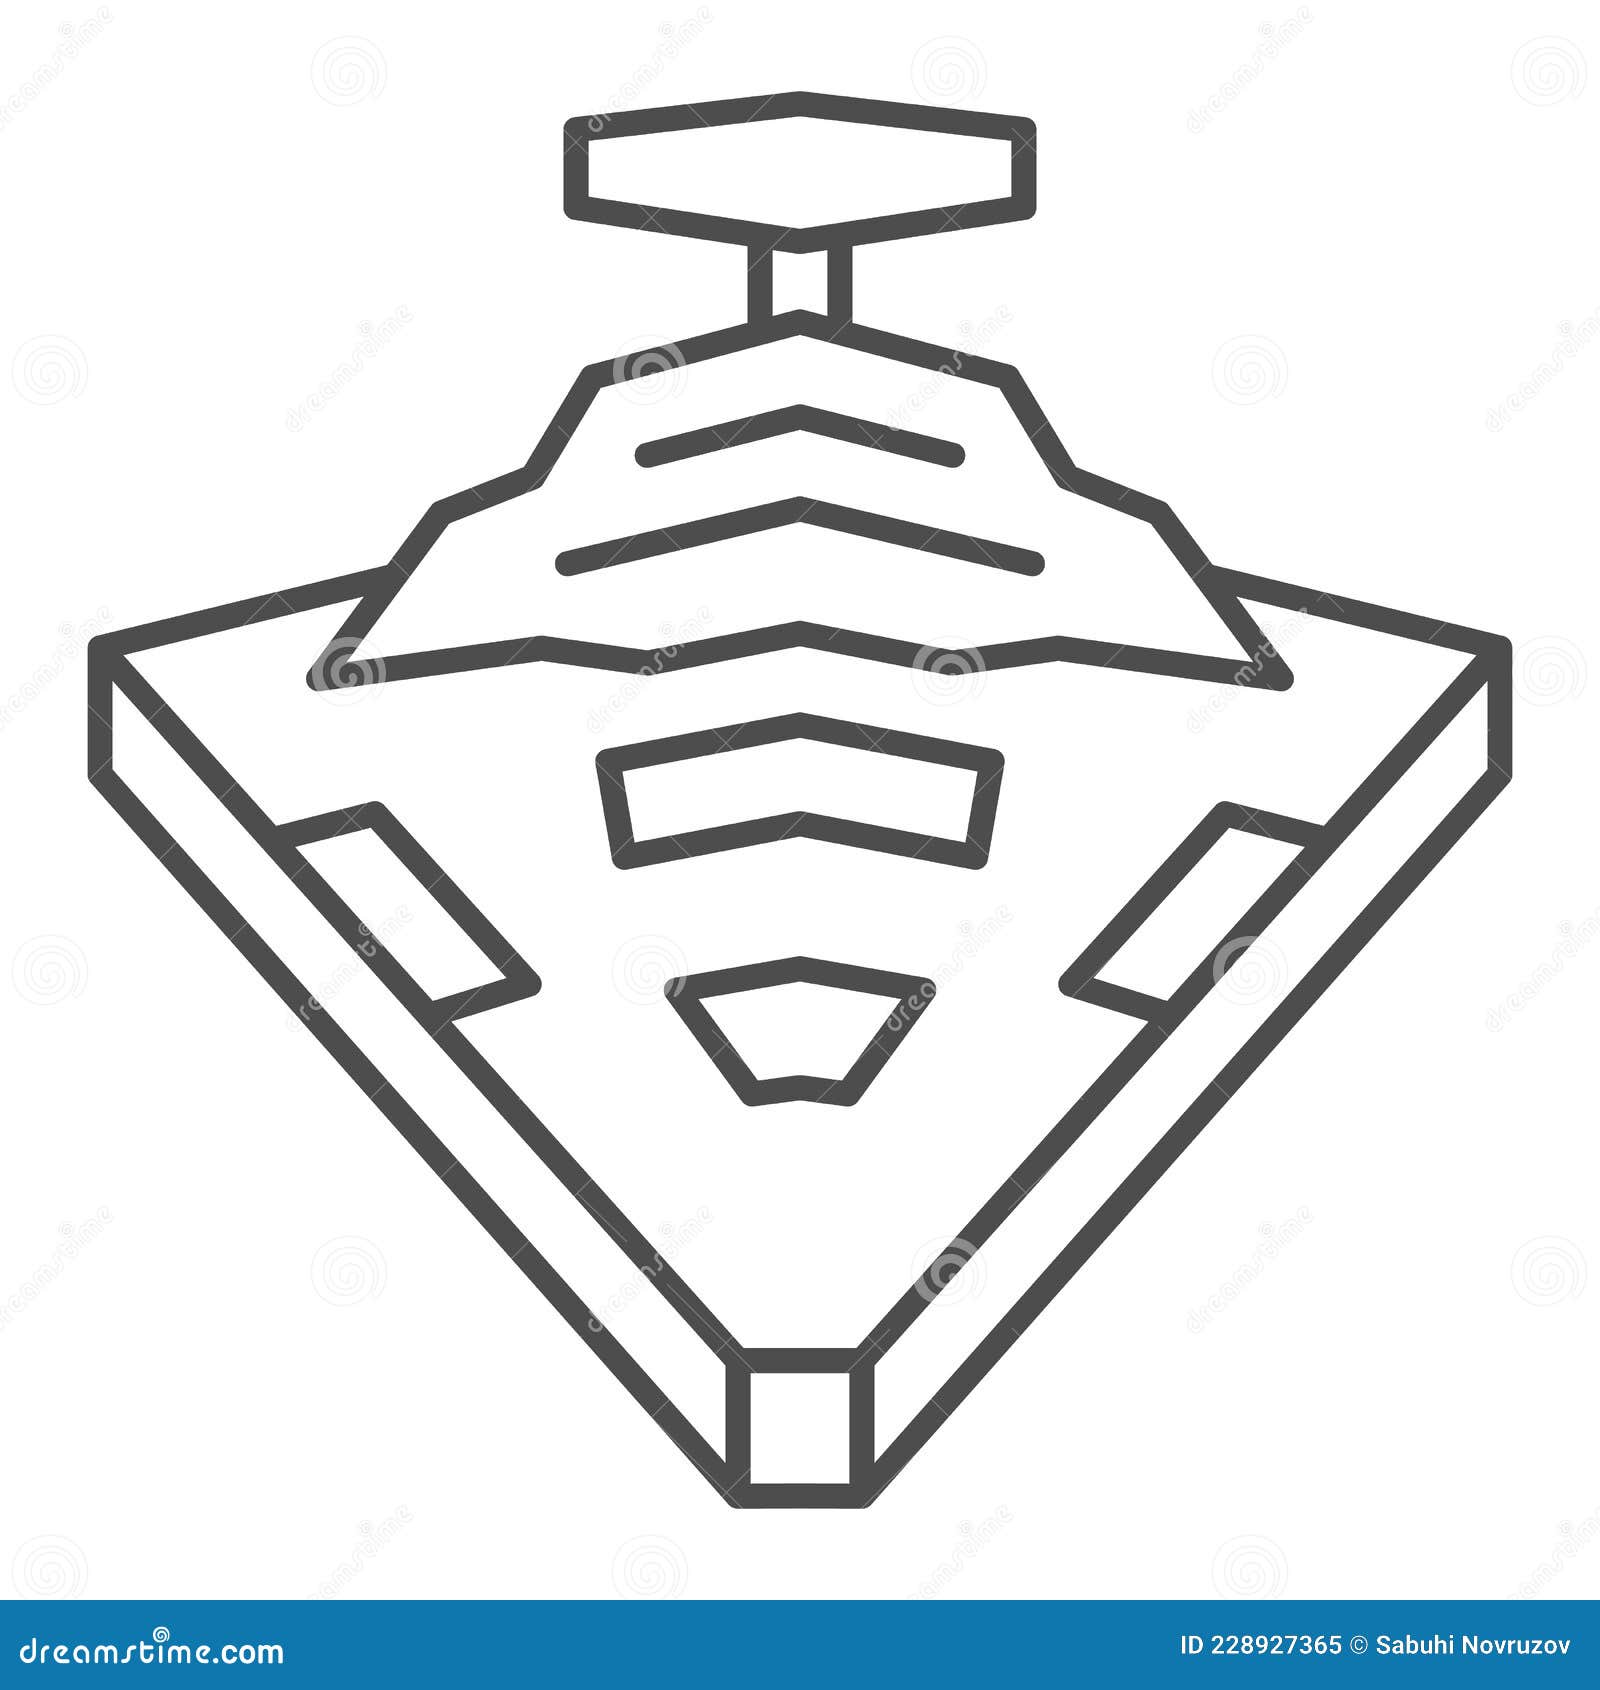 Imperial Star Destroyer Thin Line Icon, Star Wars Concept, Wedge Shaped  Capital Ship Vector Sign on White Background Editorial Image - Illustration  of target, capital: 228927365